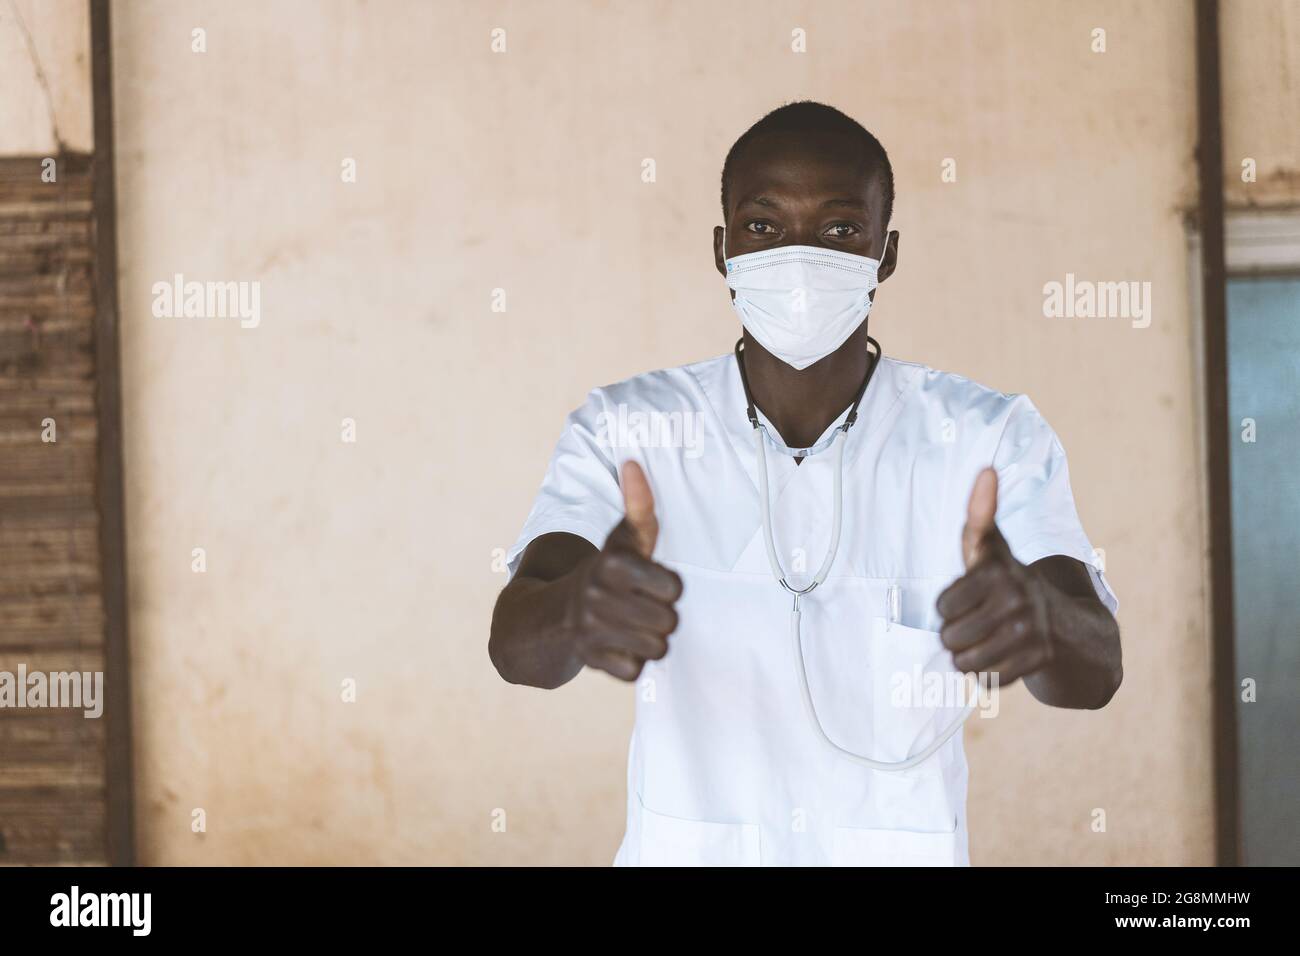 This is an image of an African nurse doctor showing thumbs up to encourage wearing face masks. Stock Photo